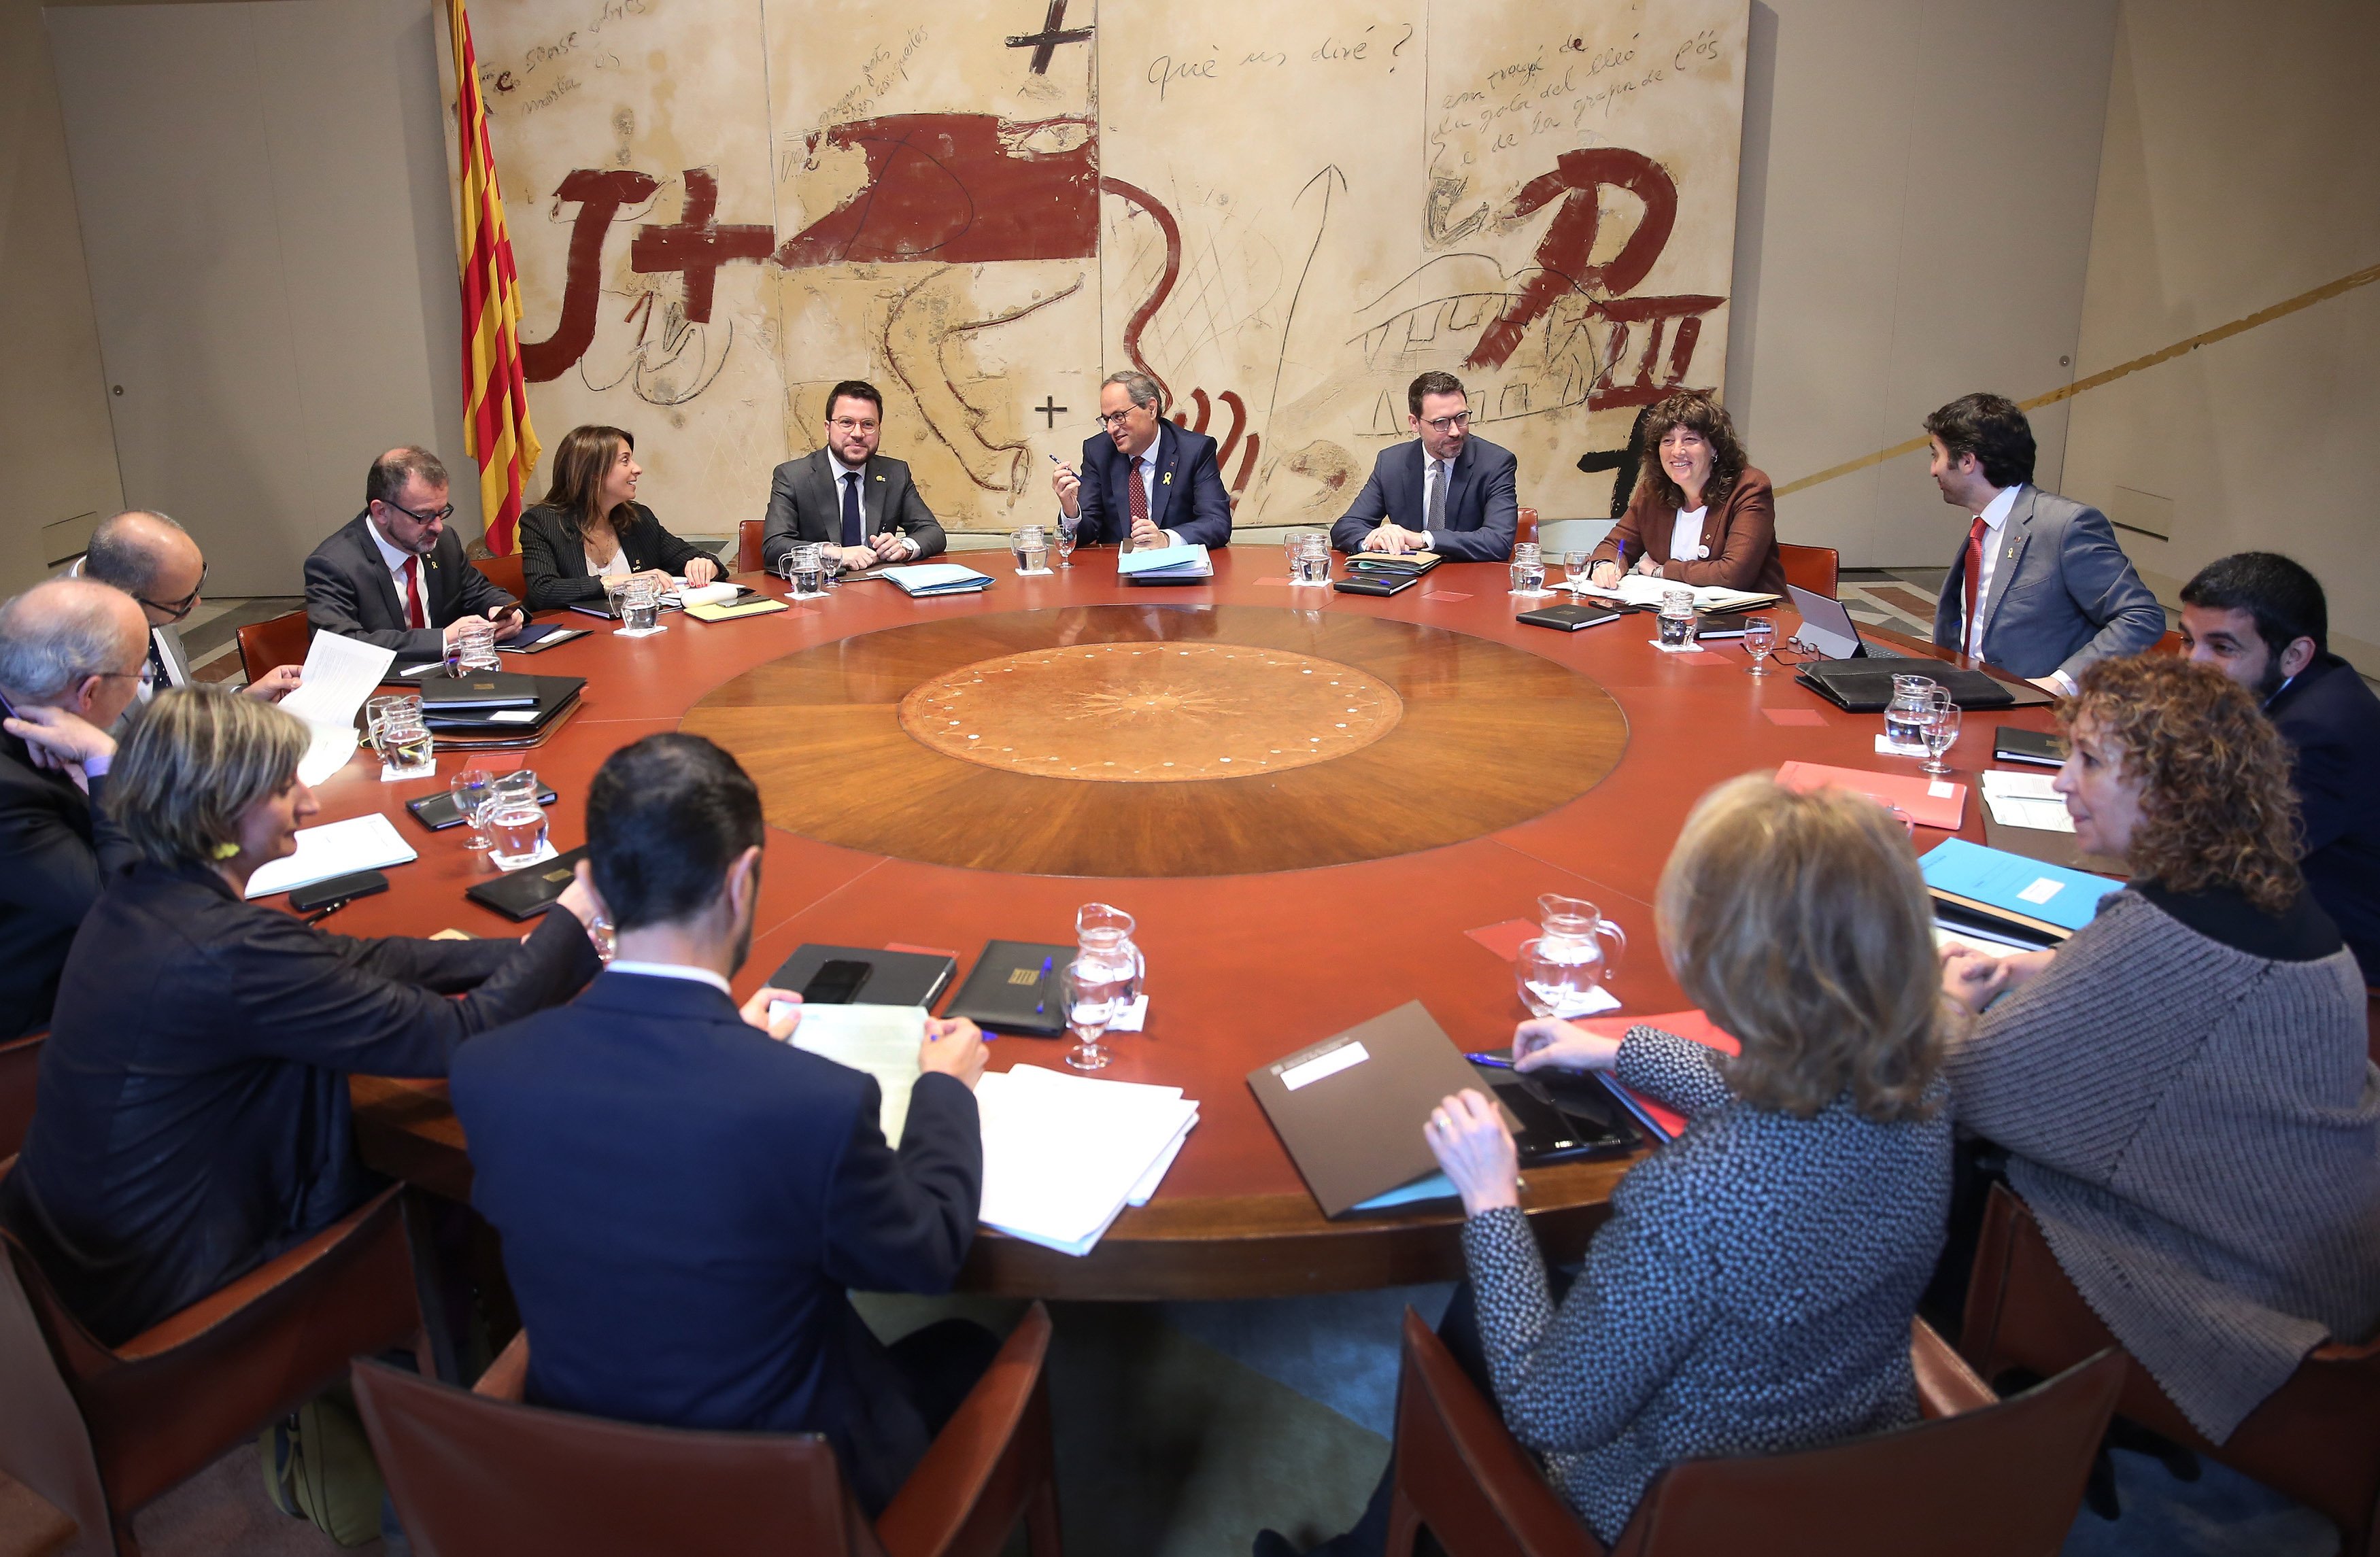 Unease in the Catalan government over president Torra's unexpected announcement